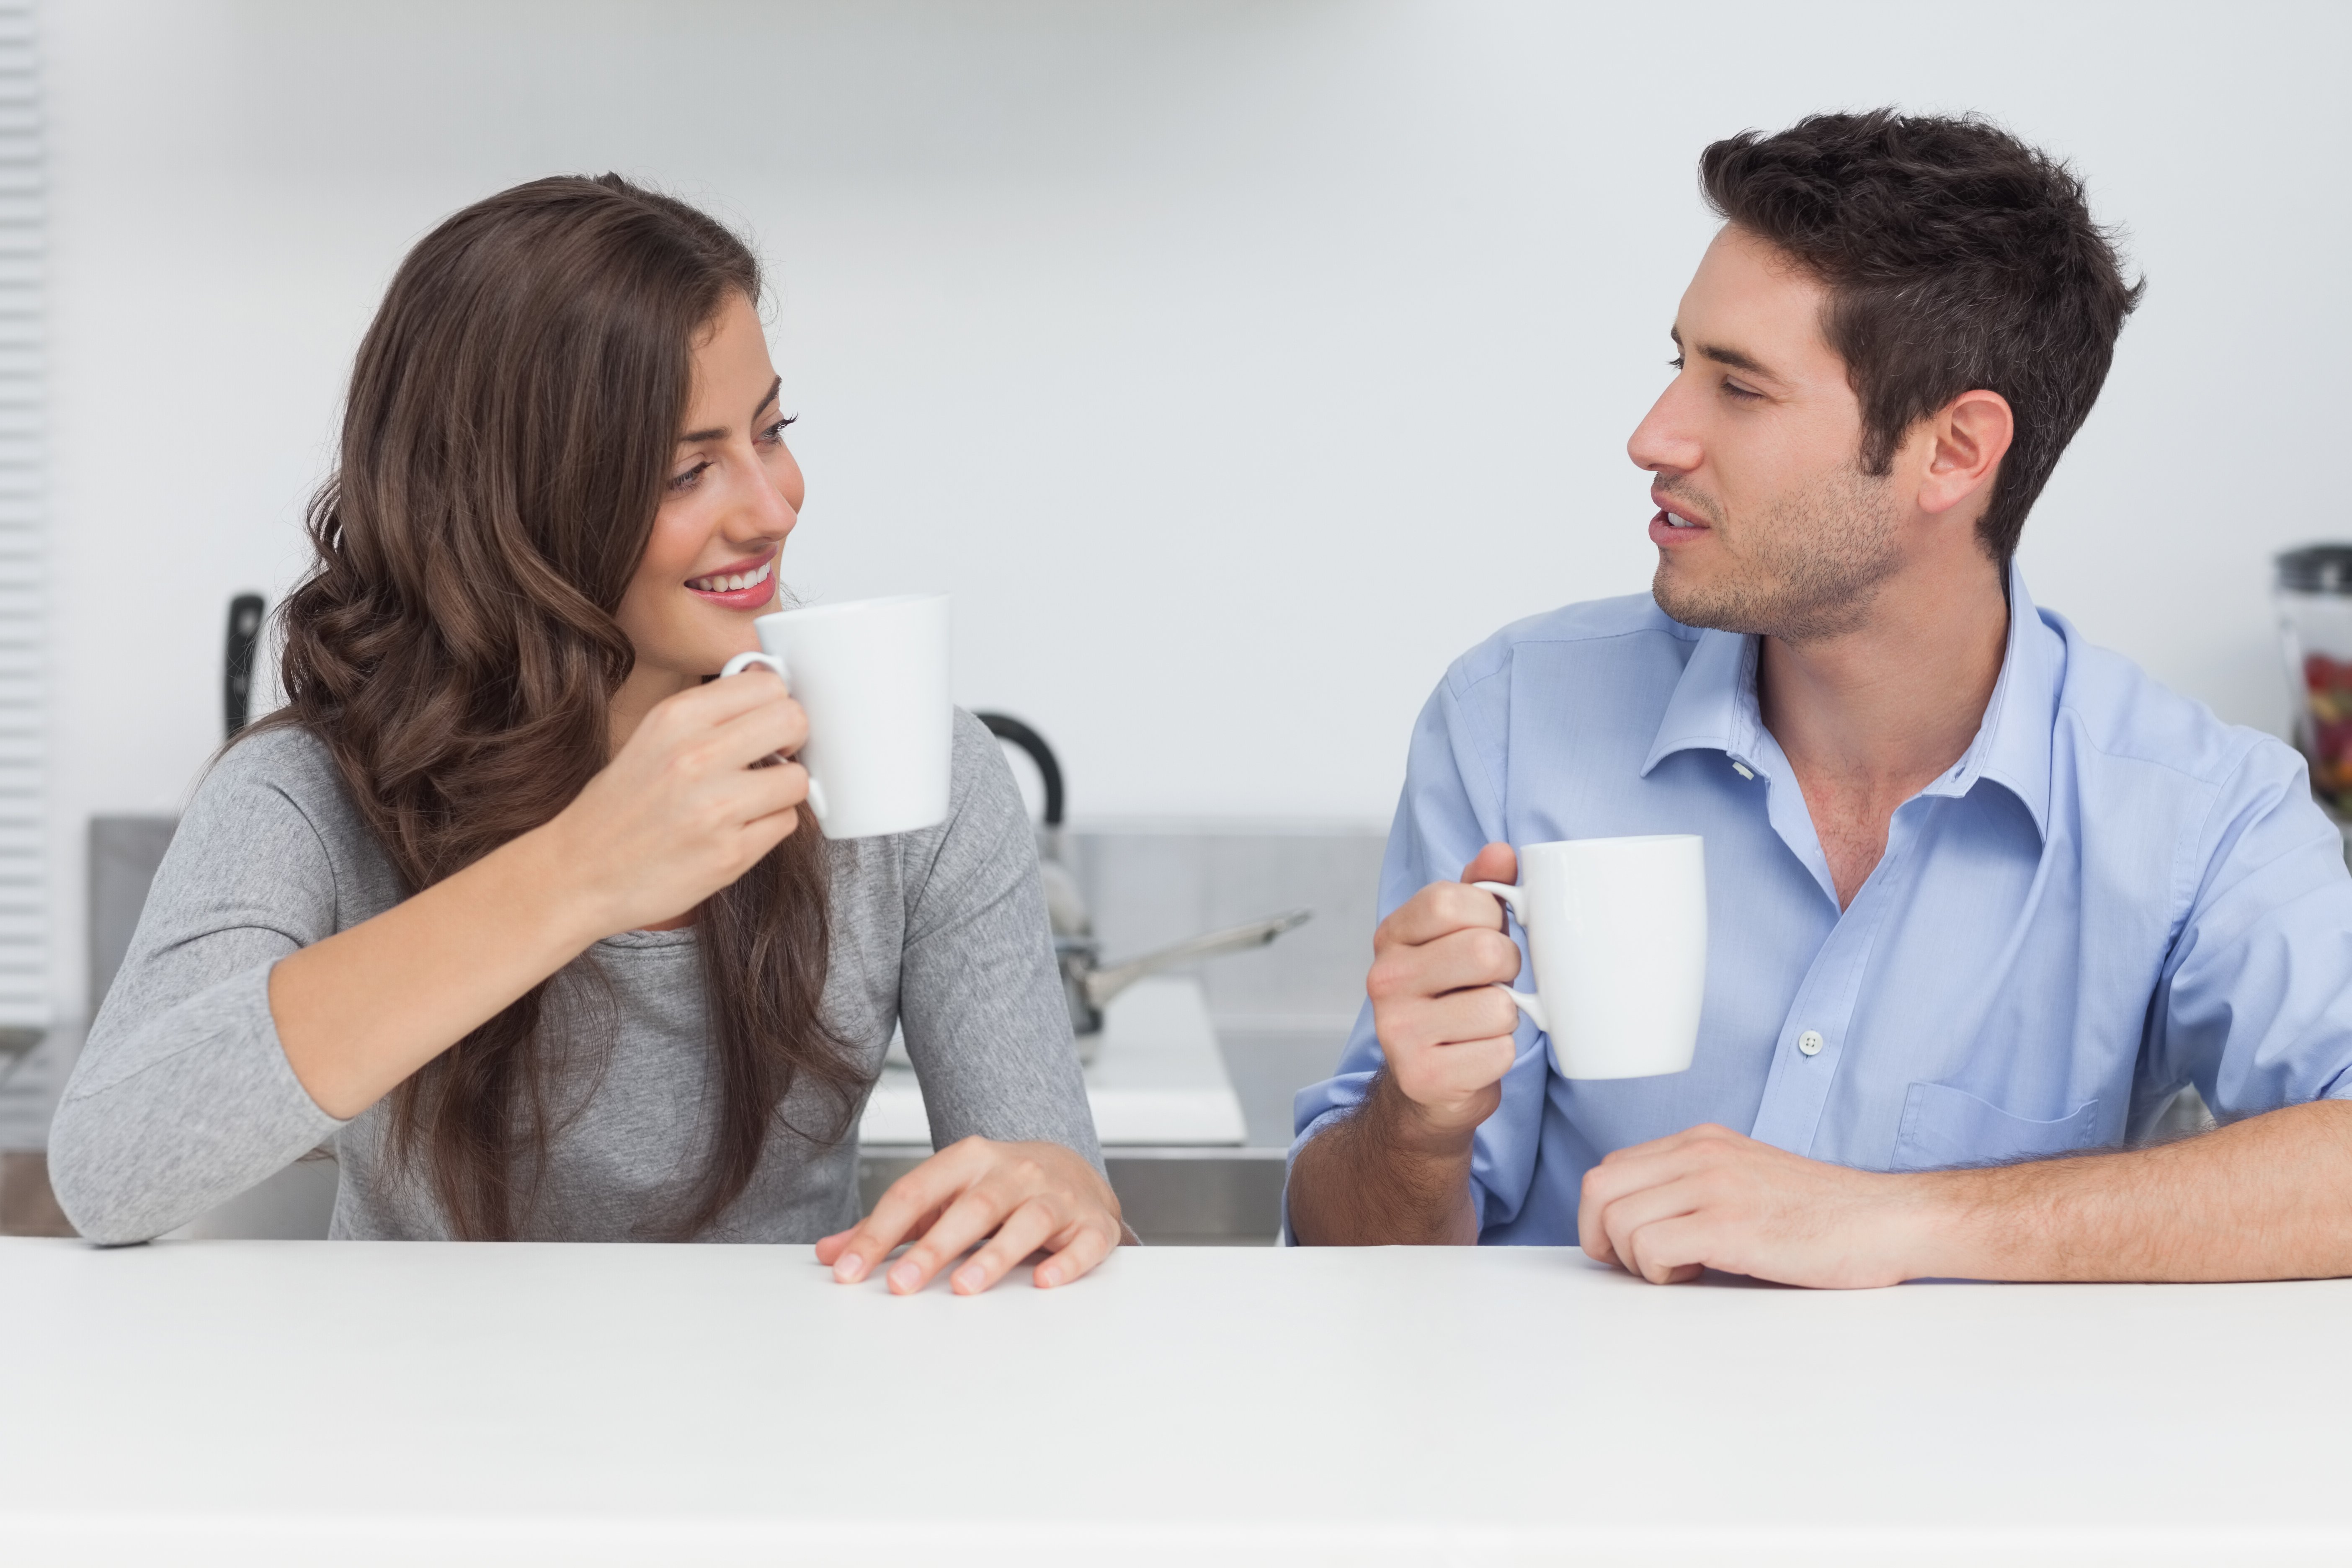 Couple drinking coffee in the kitchen | Photo: Shutterstock